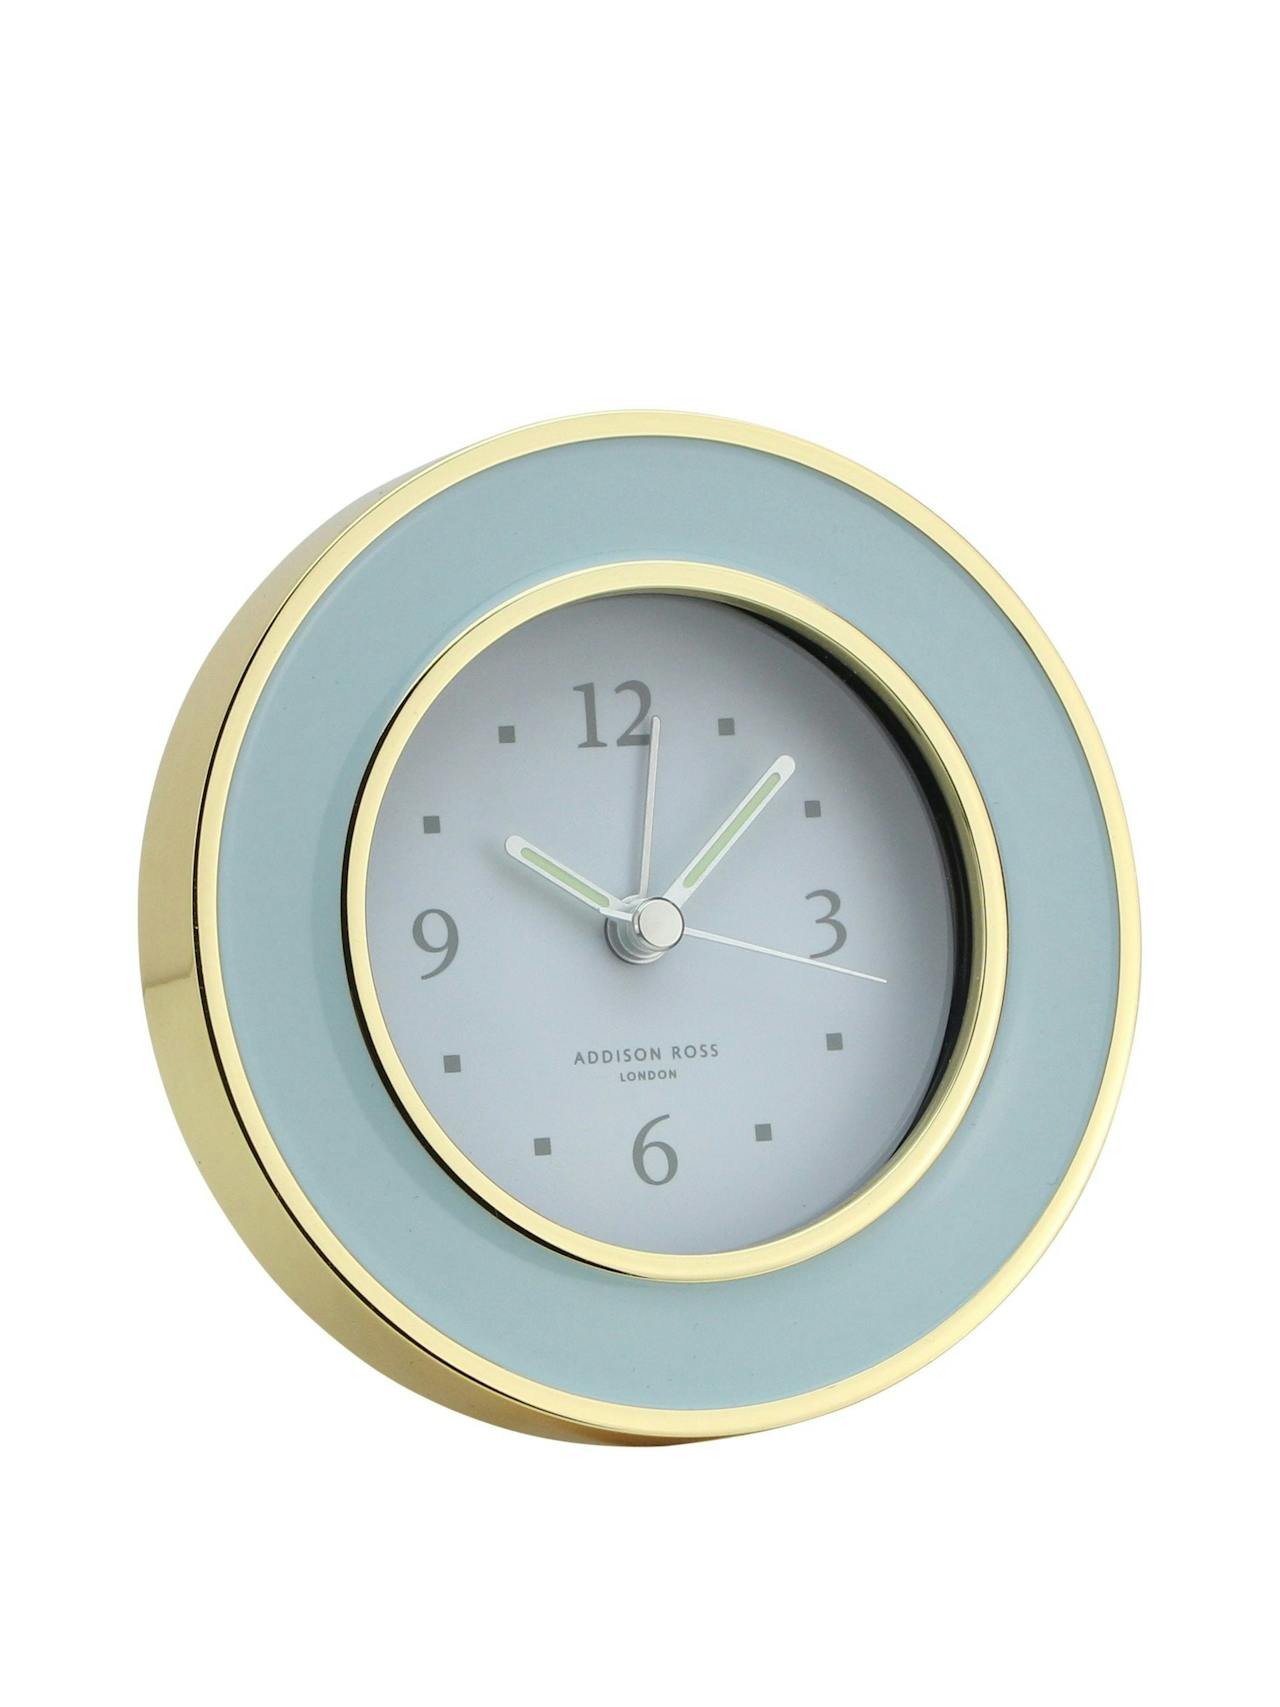 Blue and gold alarm clock